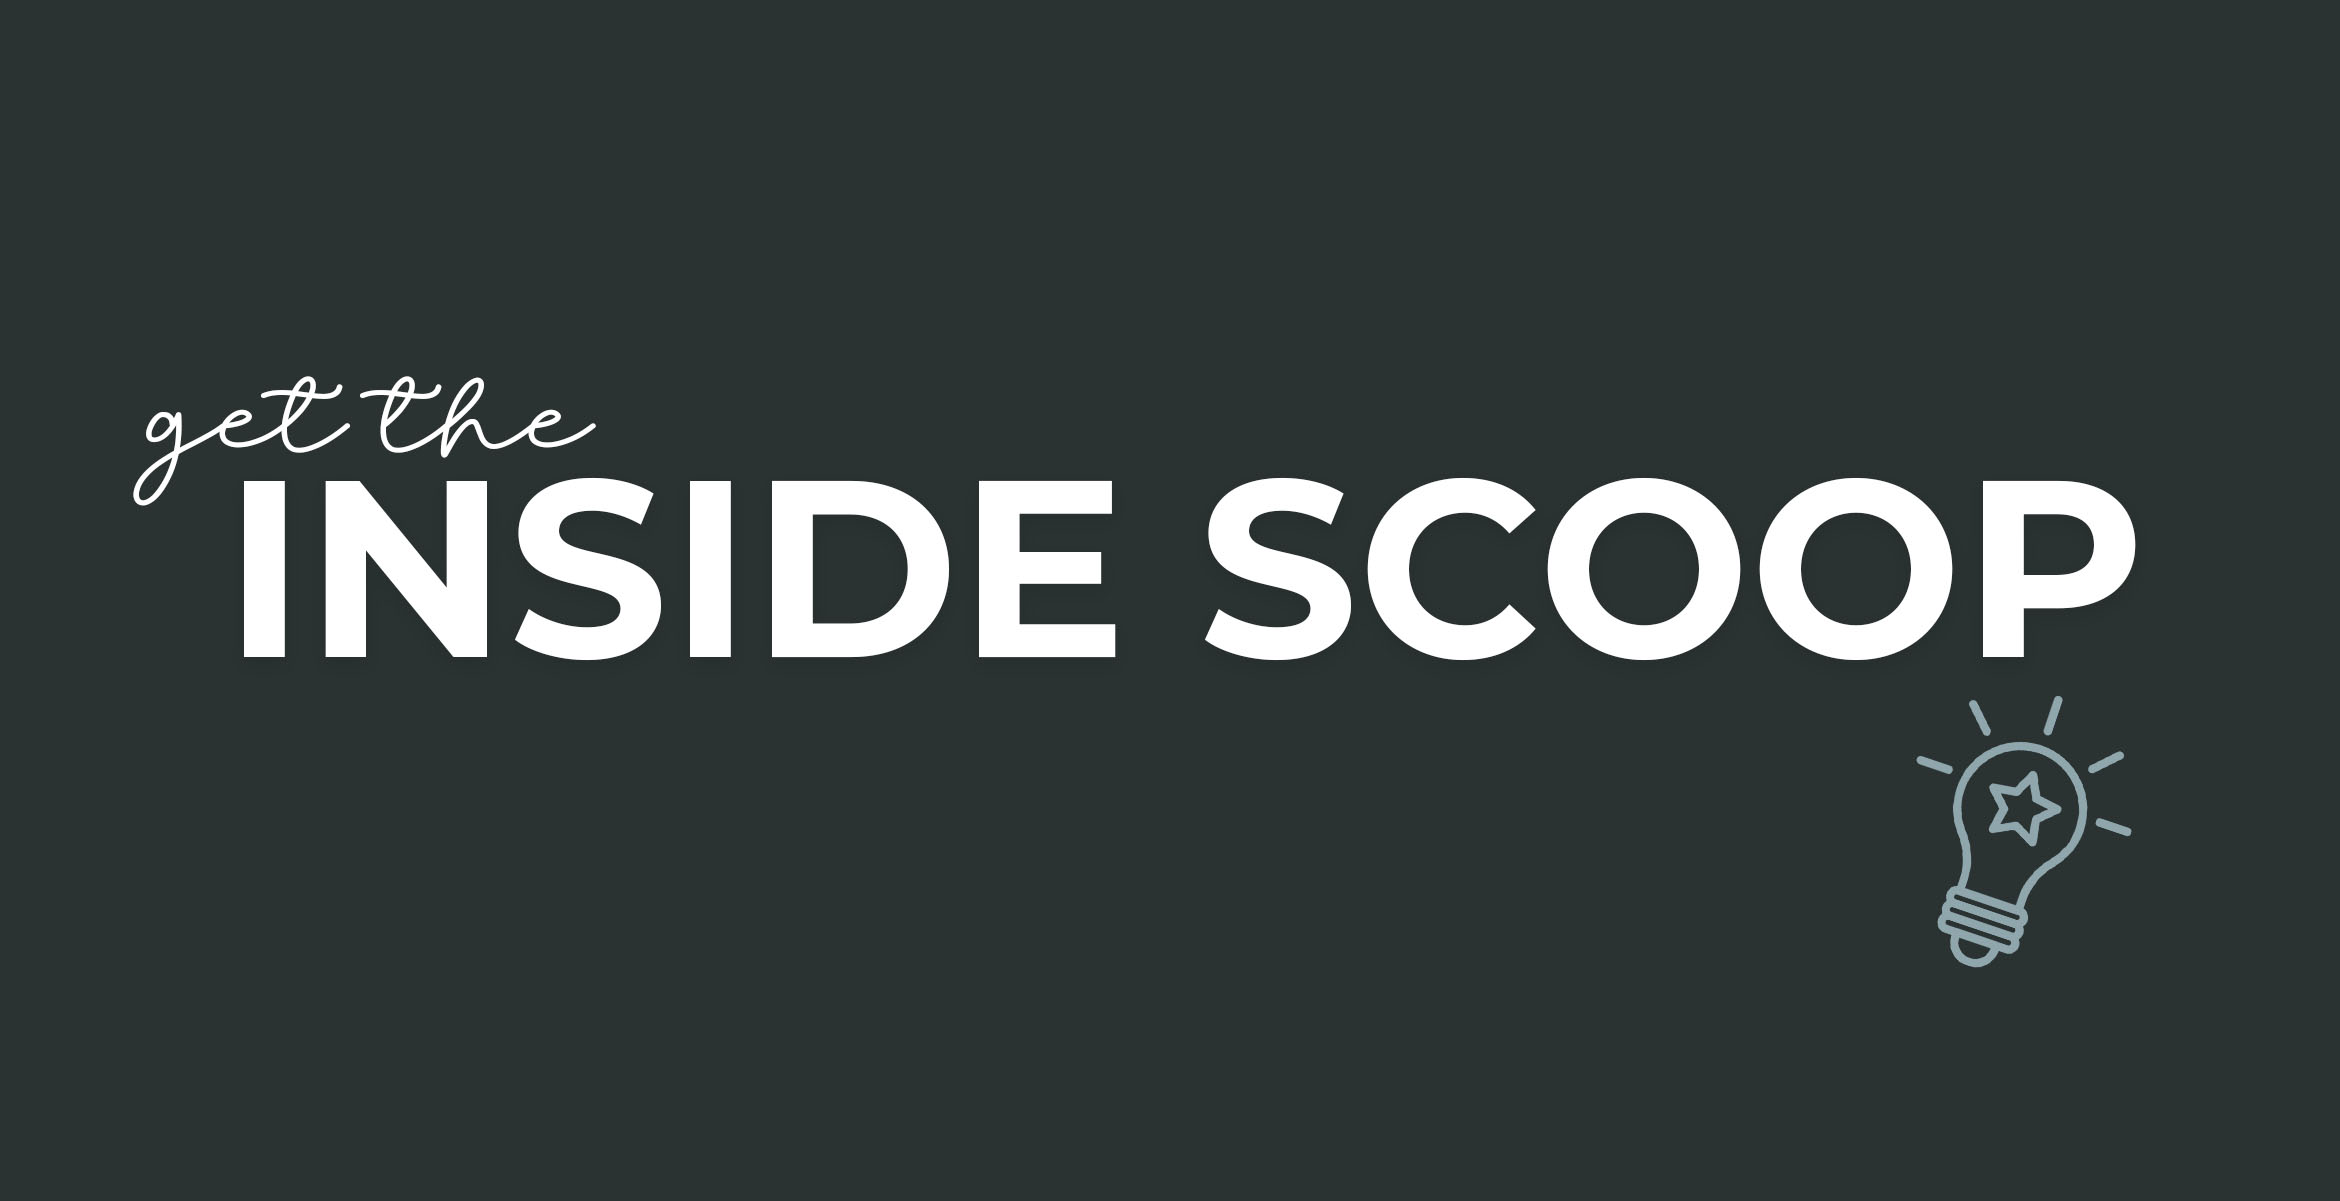 You are currently viewing Get the inside scoop May 2022